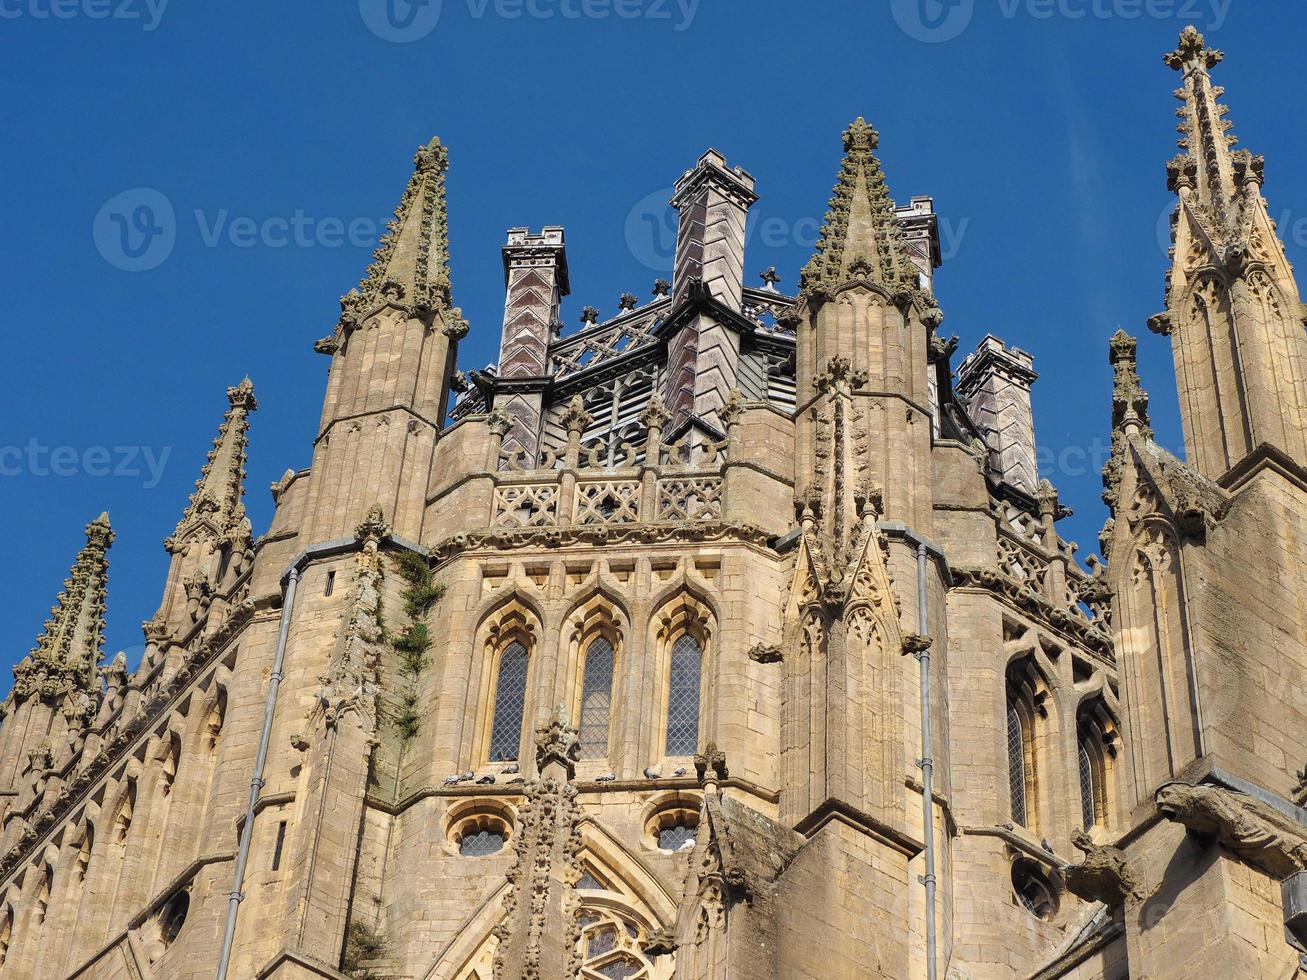 cattedrale di ely a ely foto